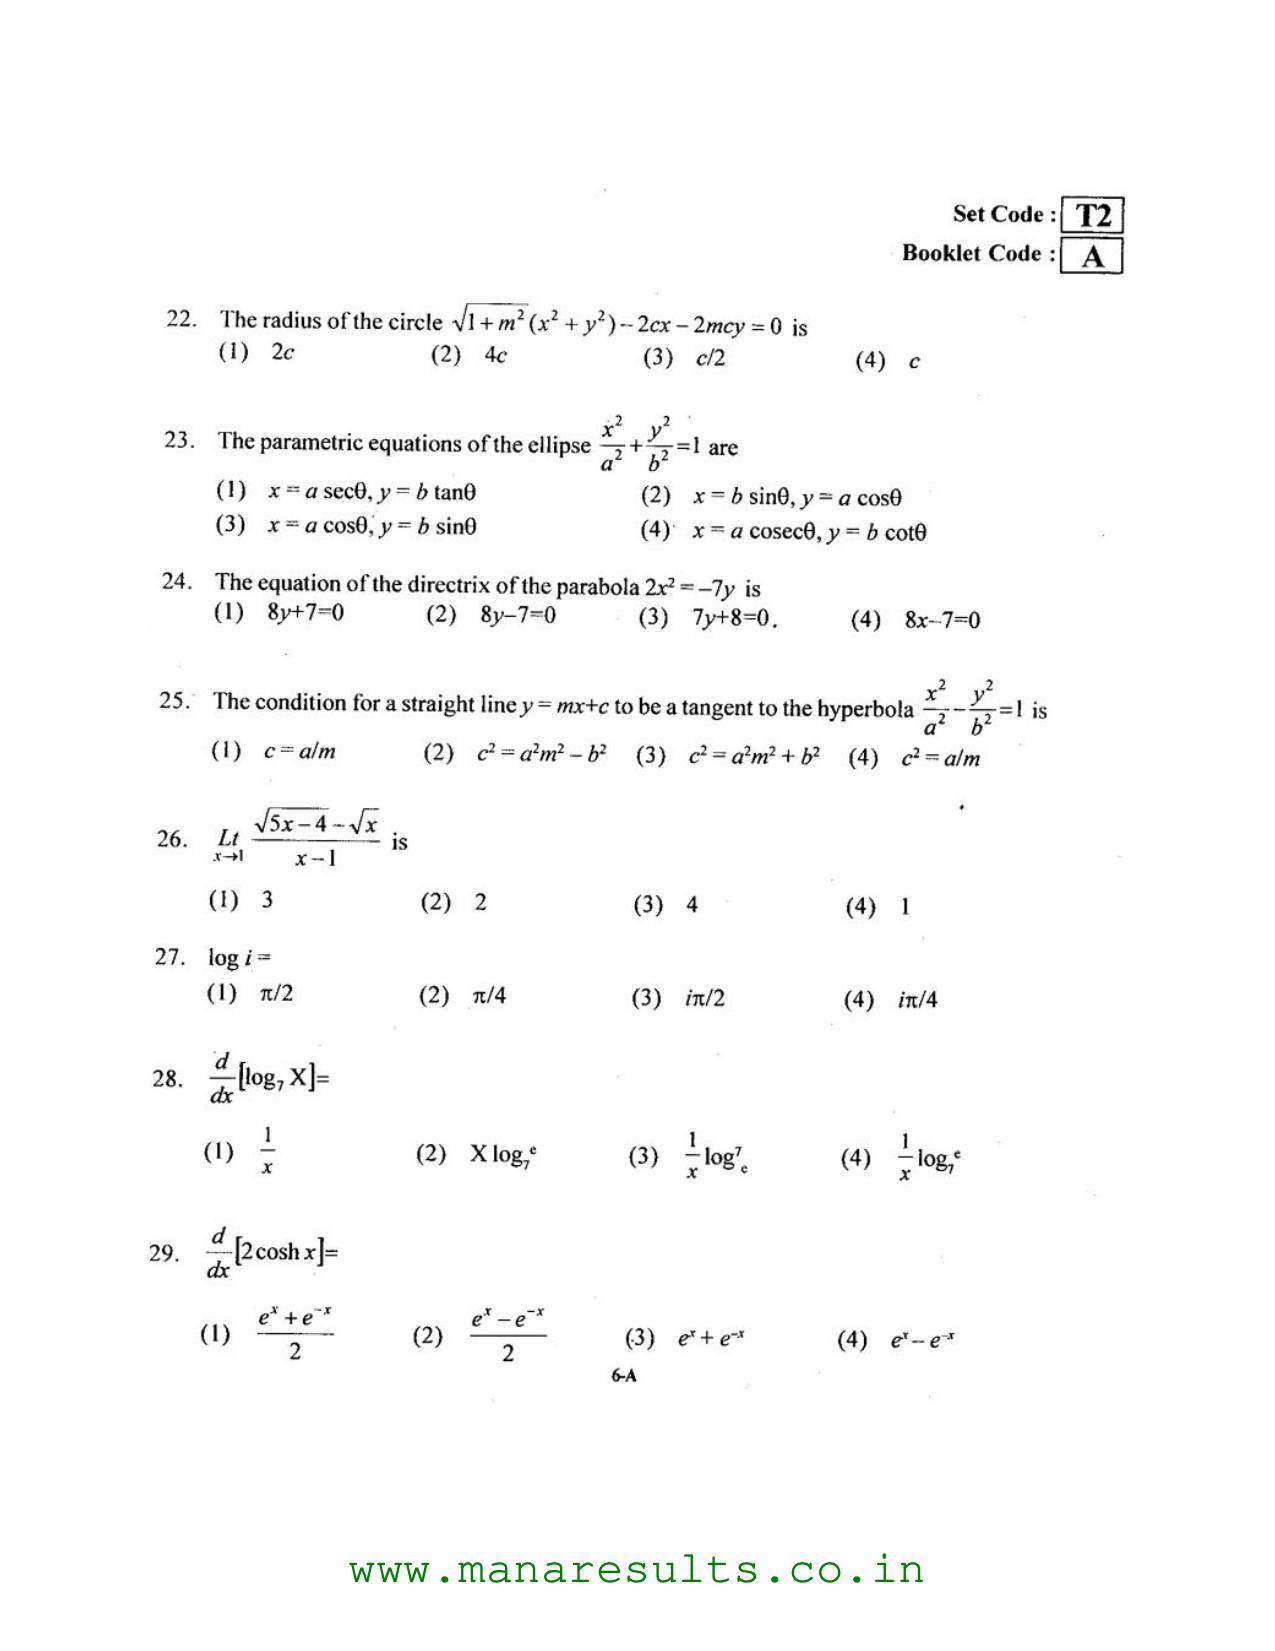 AP ECET 2016 Mining Engineering Old Previous Question Papers - Page 5